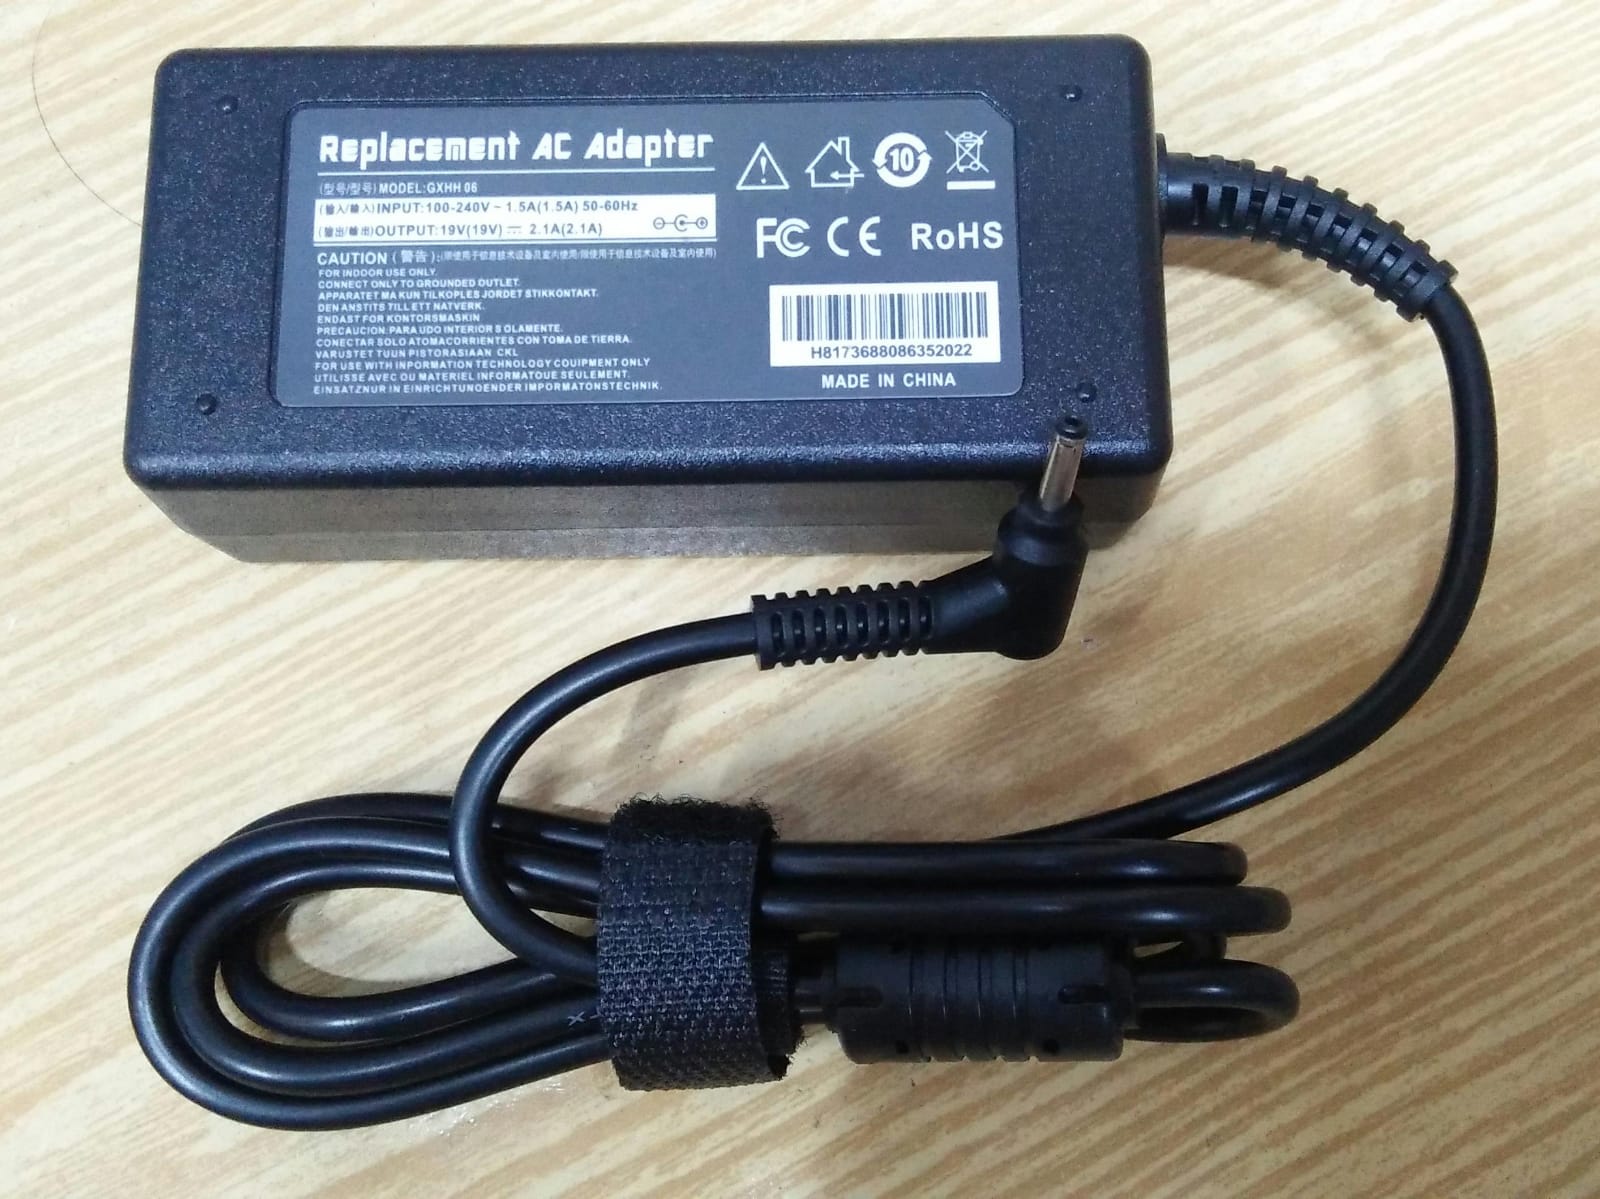 Laptop Adapter best price Adapter Samsung 19v - 2a1 | 40w (3.0*1.0)